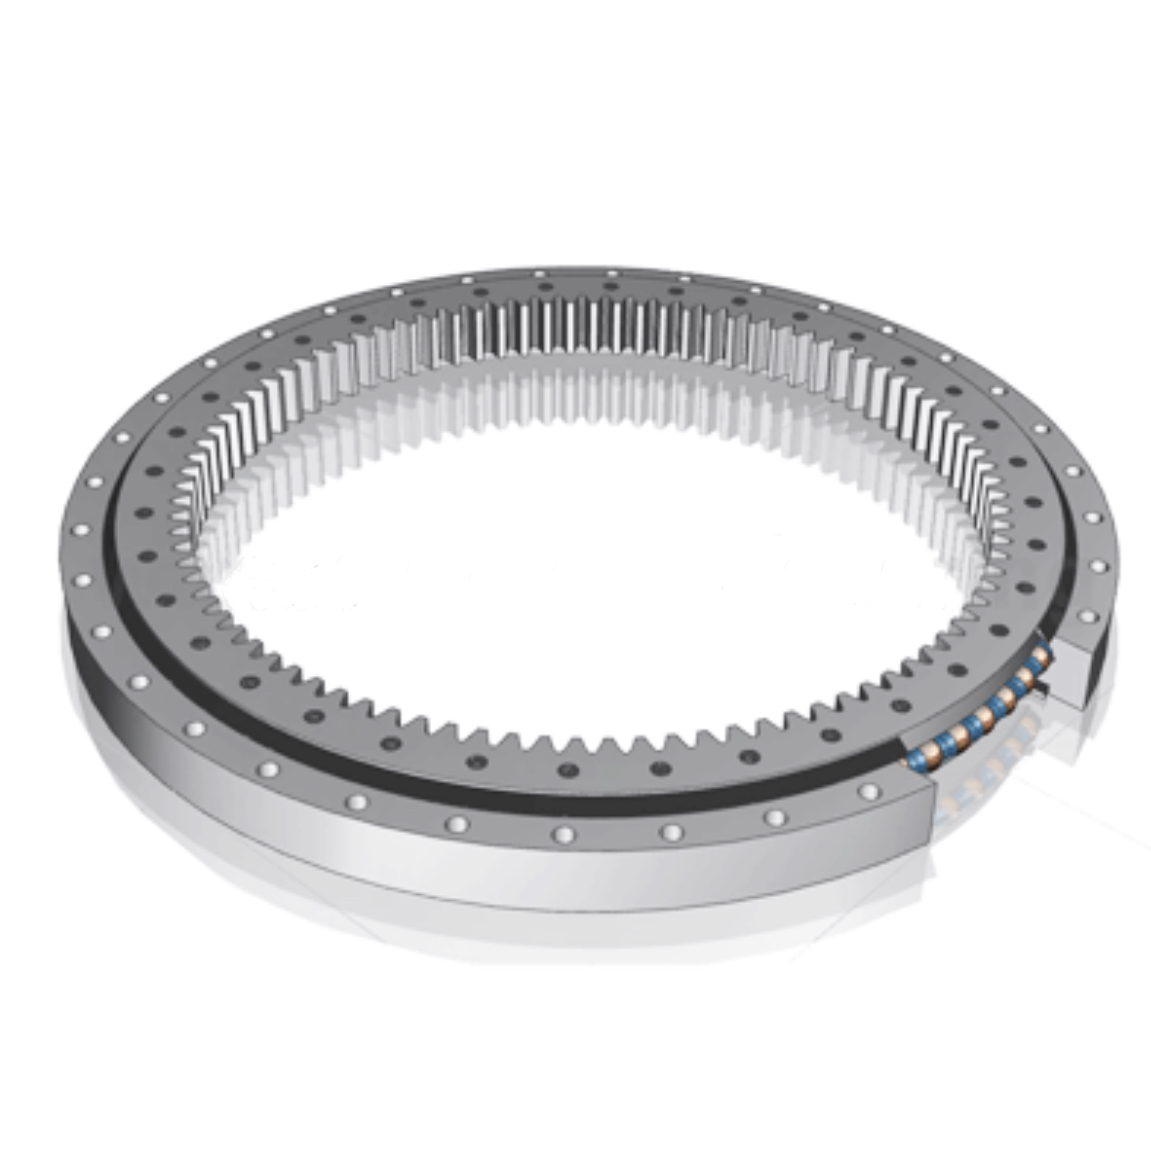 Experienced Slewing Bearing Manufacturers & Slewing Ring Suppliers | SWBTEC